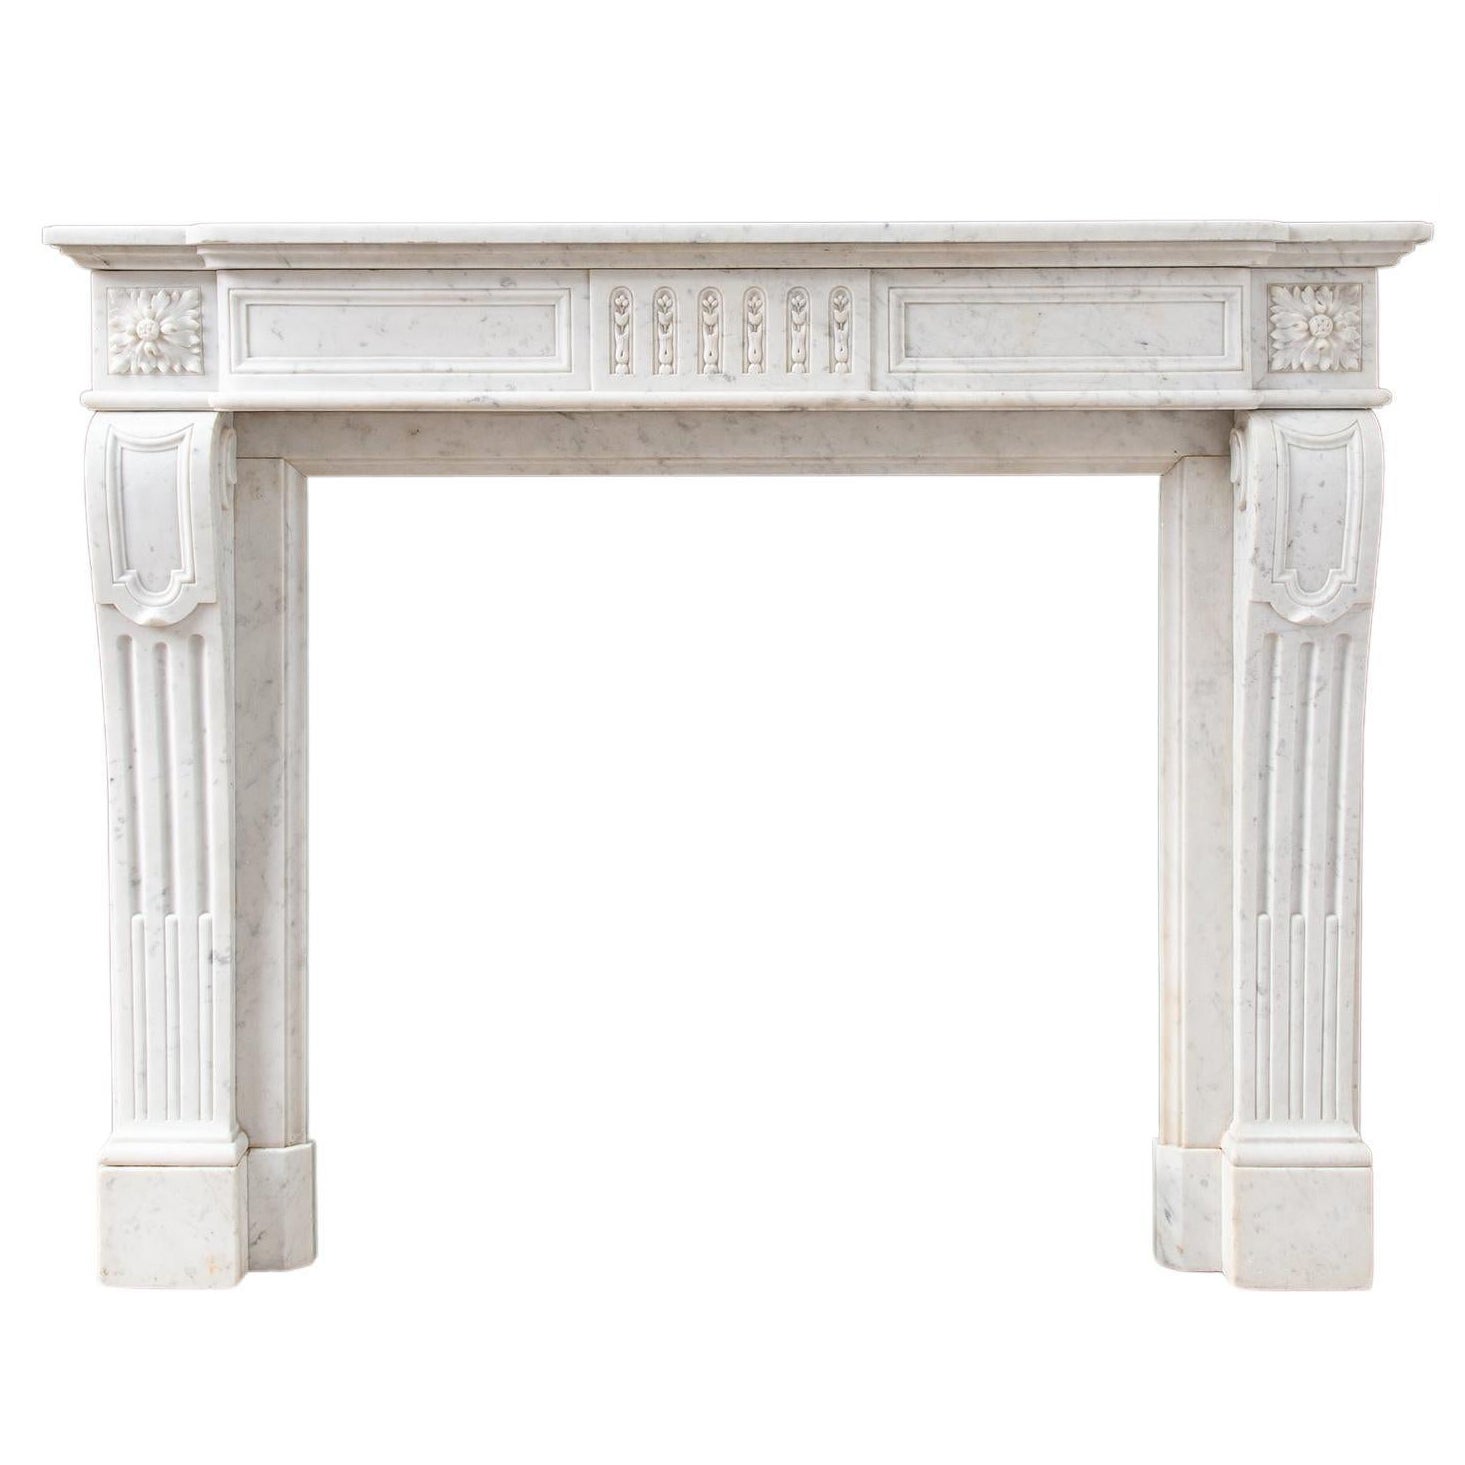 Luxury French Louis XVI Carrara Marble Antique Fireplace Surround For Sale